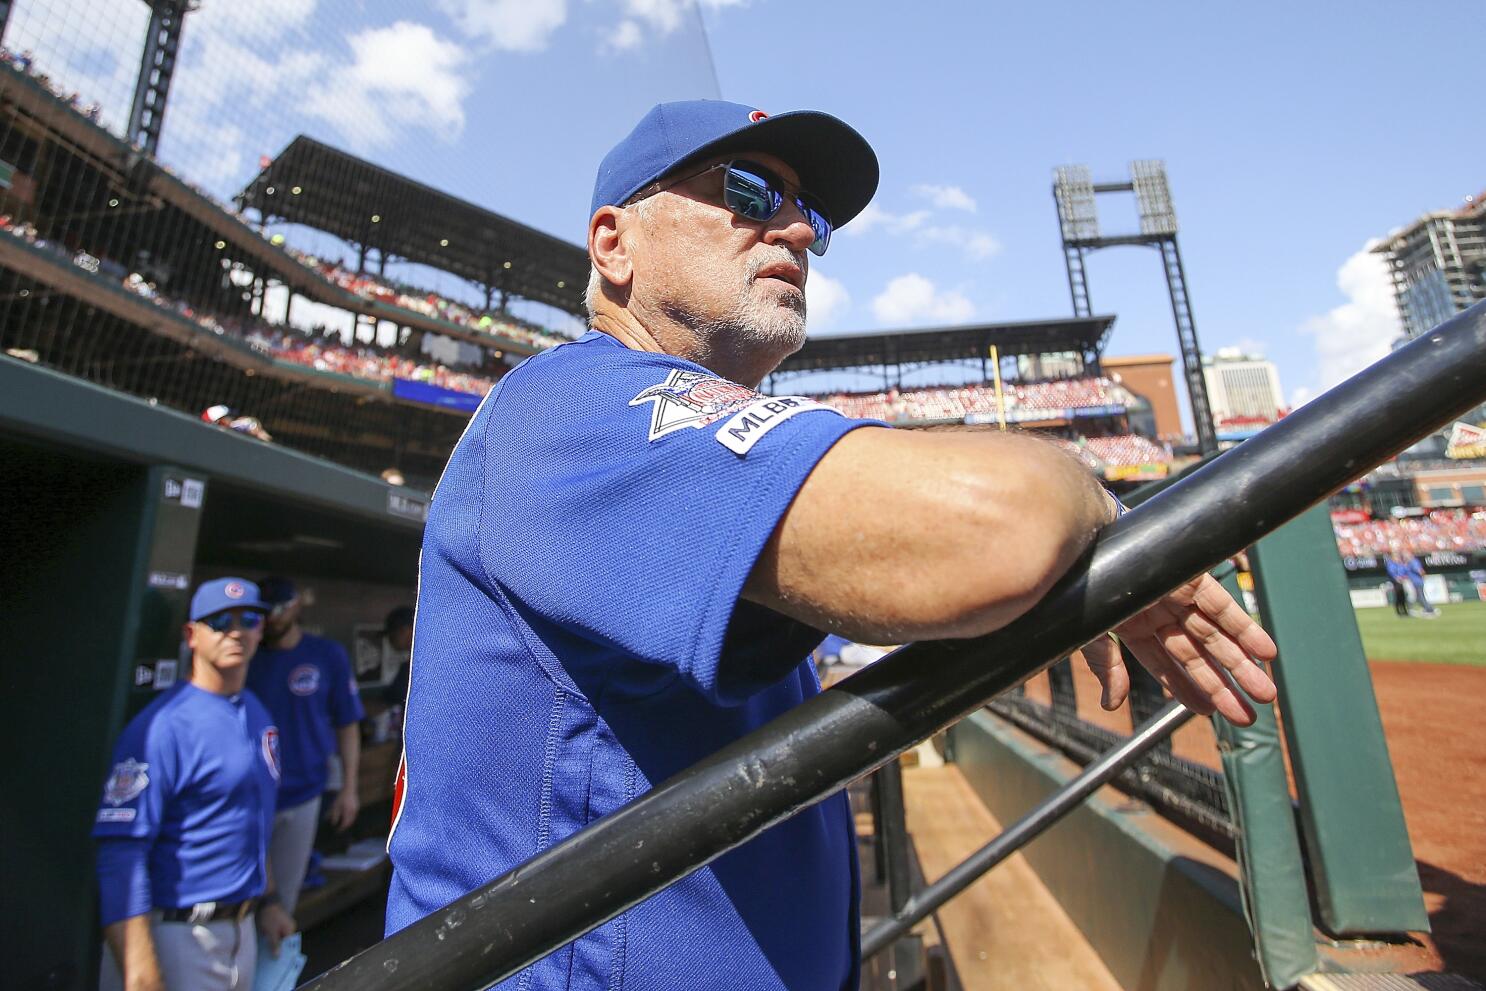 Who Is More Likely to Make a Major Splash: Cubs or Padres? - Stadium